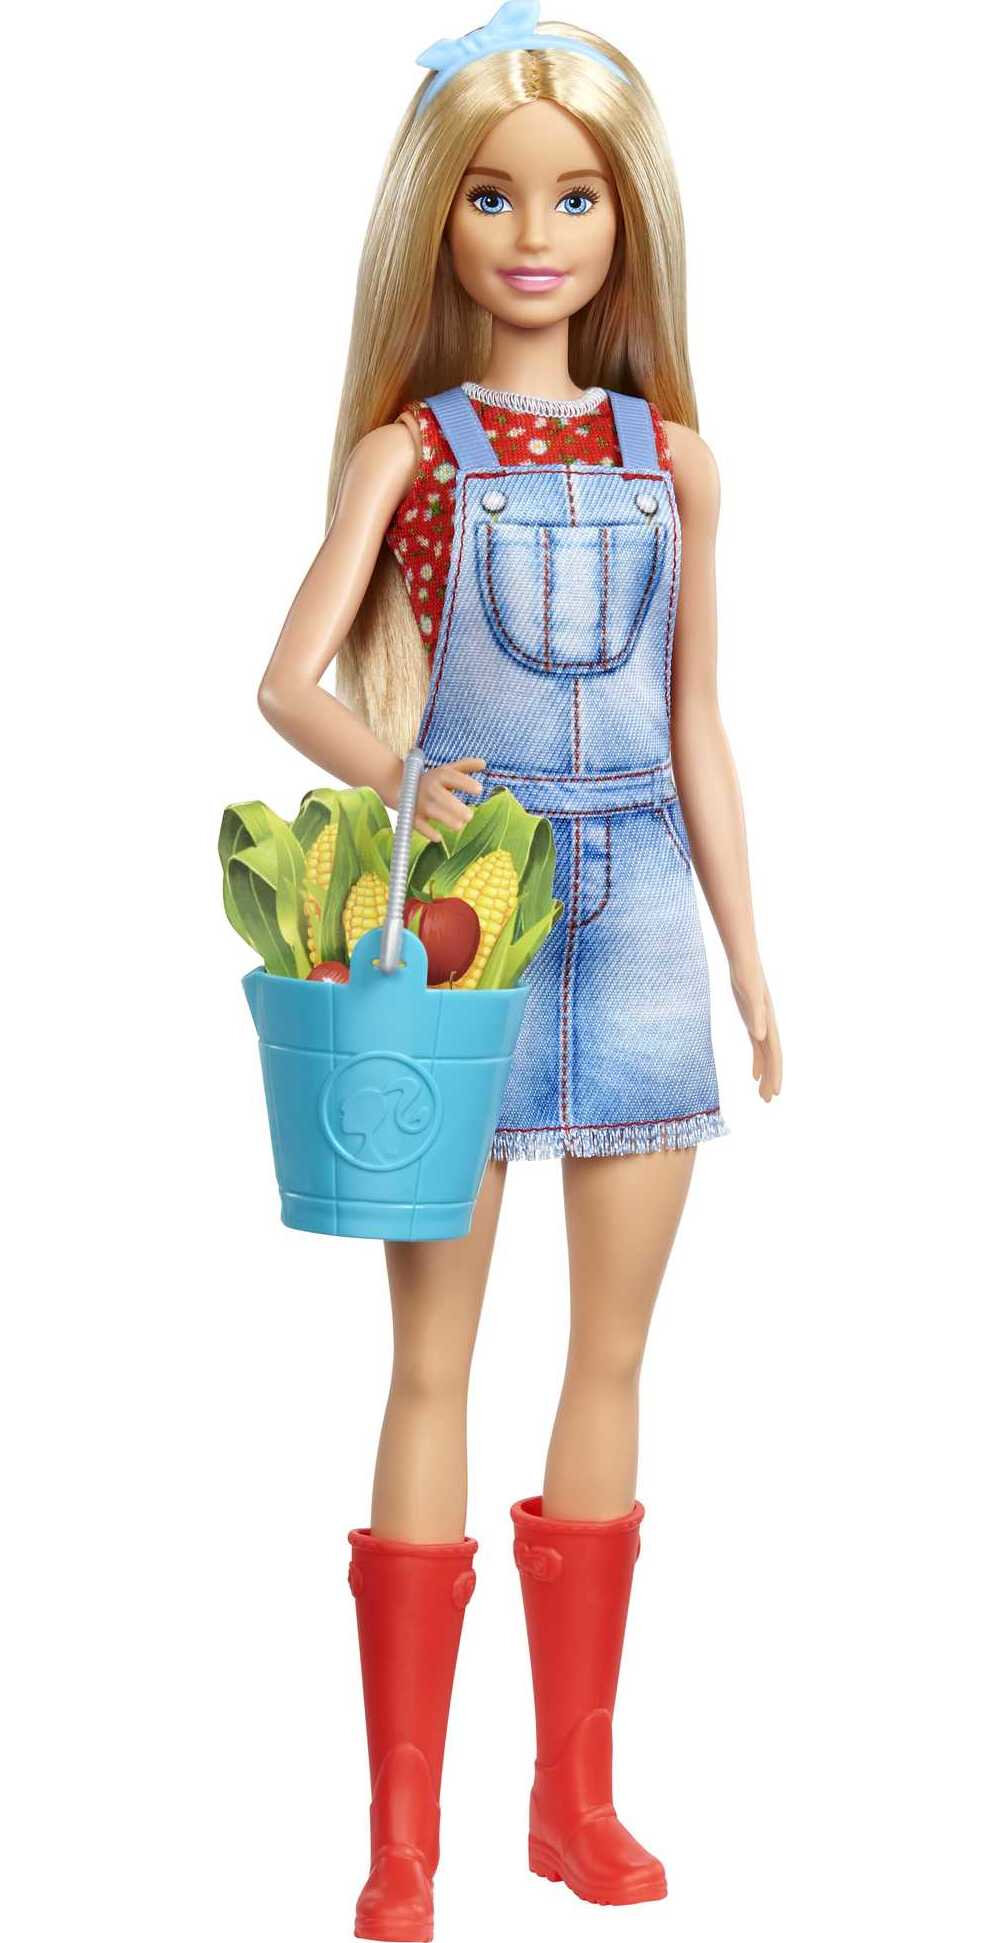 Barbie Sweet Orchard Farm Doll, Blonde Toy Doll with Overalls, Boots, Food Bucket & Accessories - image 1 of 6